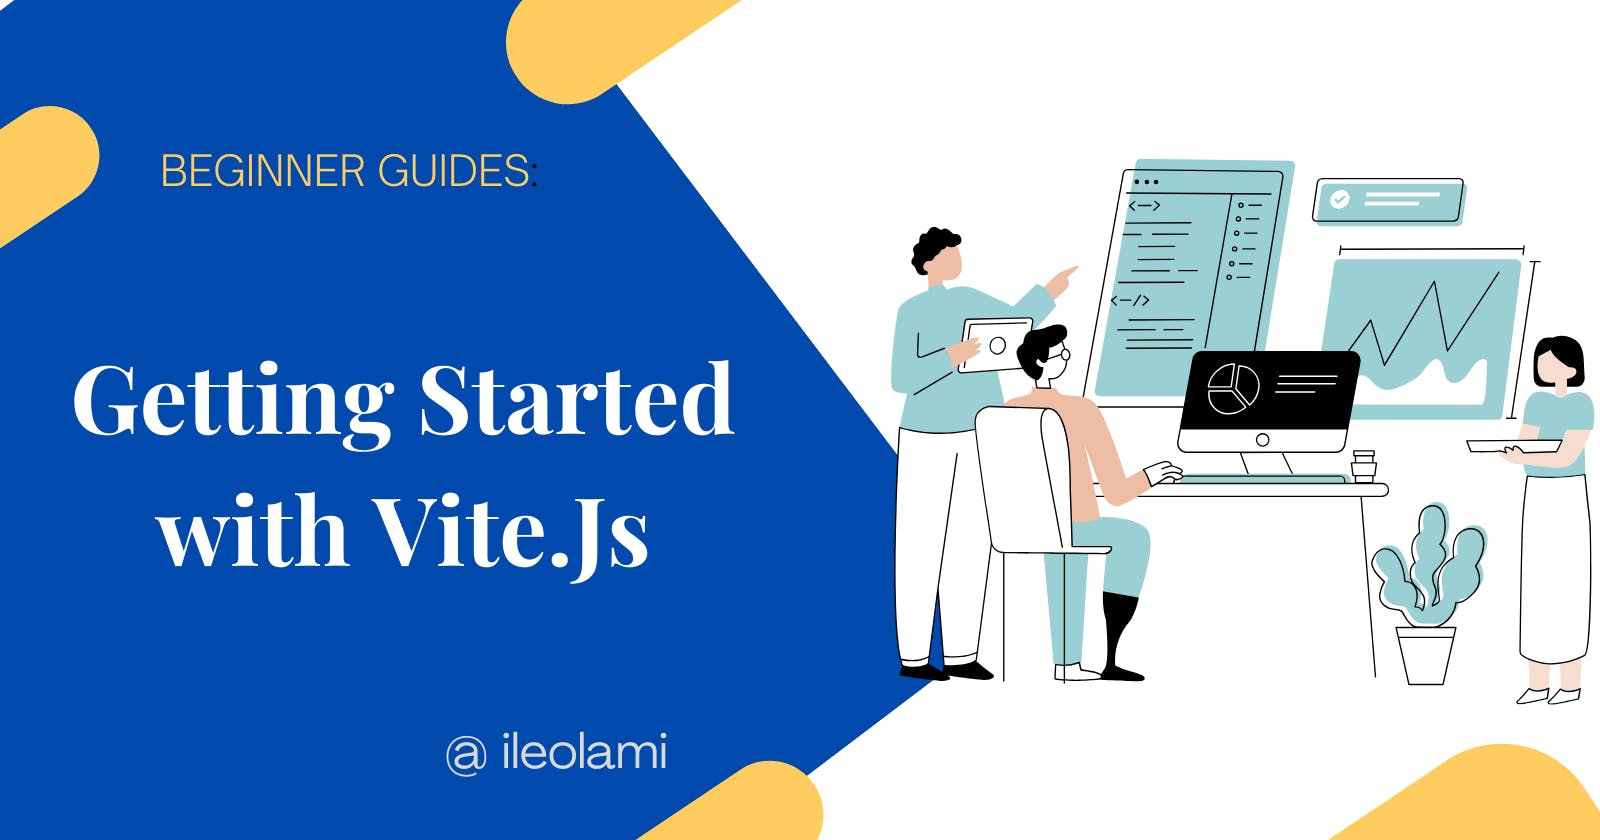 A  Beginner guide on how to install and Use Vite.Js